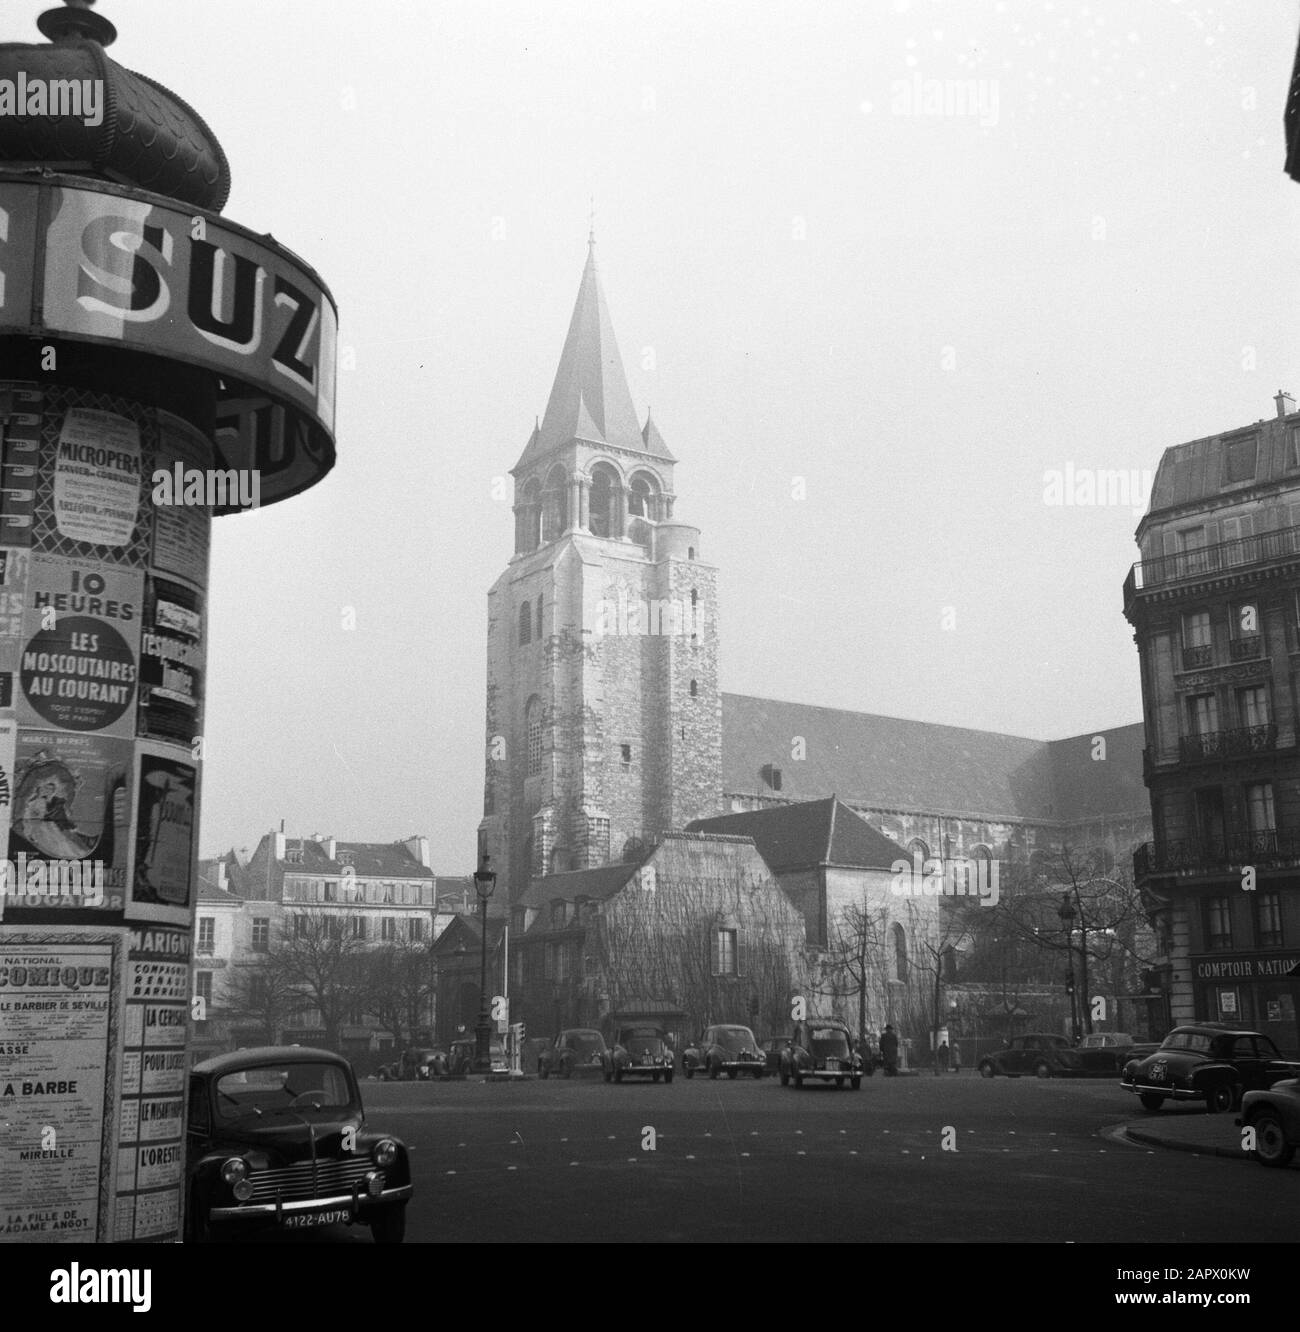 Paris. The church of St. Germain-des-Prés seen from the Rue de Rennes with an advertising column in the foreground Date: undated Location: France, Paris Keywords: architecture, cars, church buildings, church towers, billboards, Romanesque, street images Stock Photo